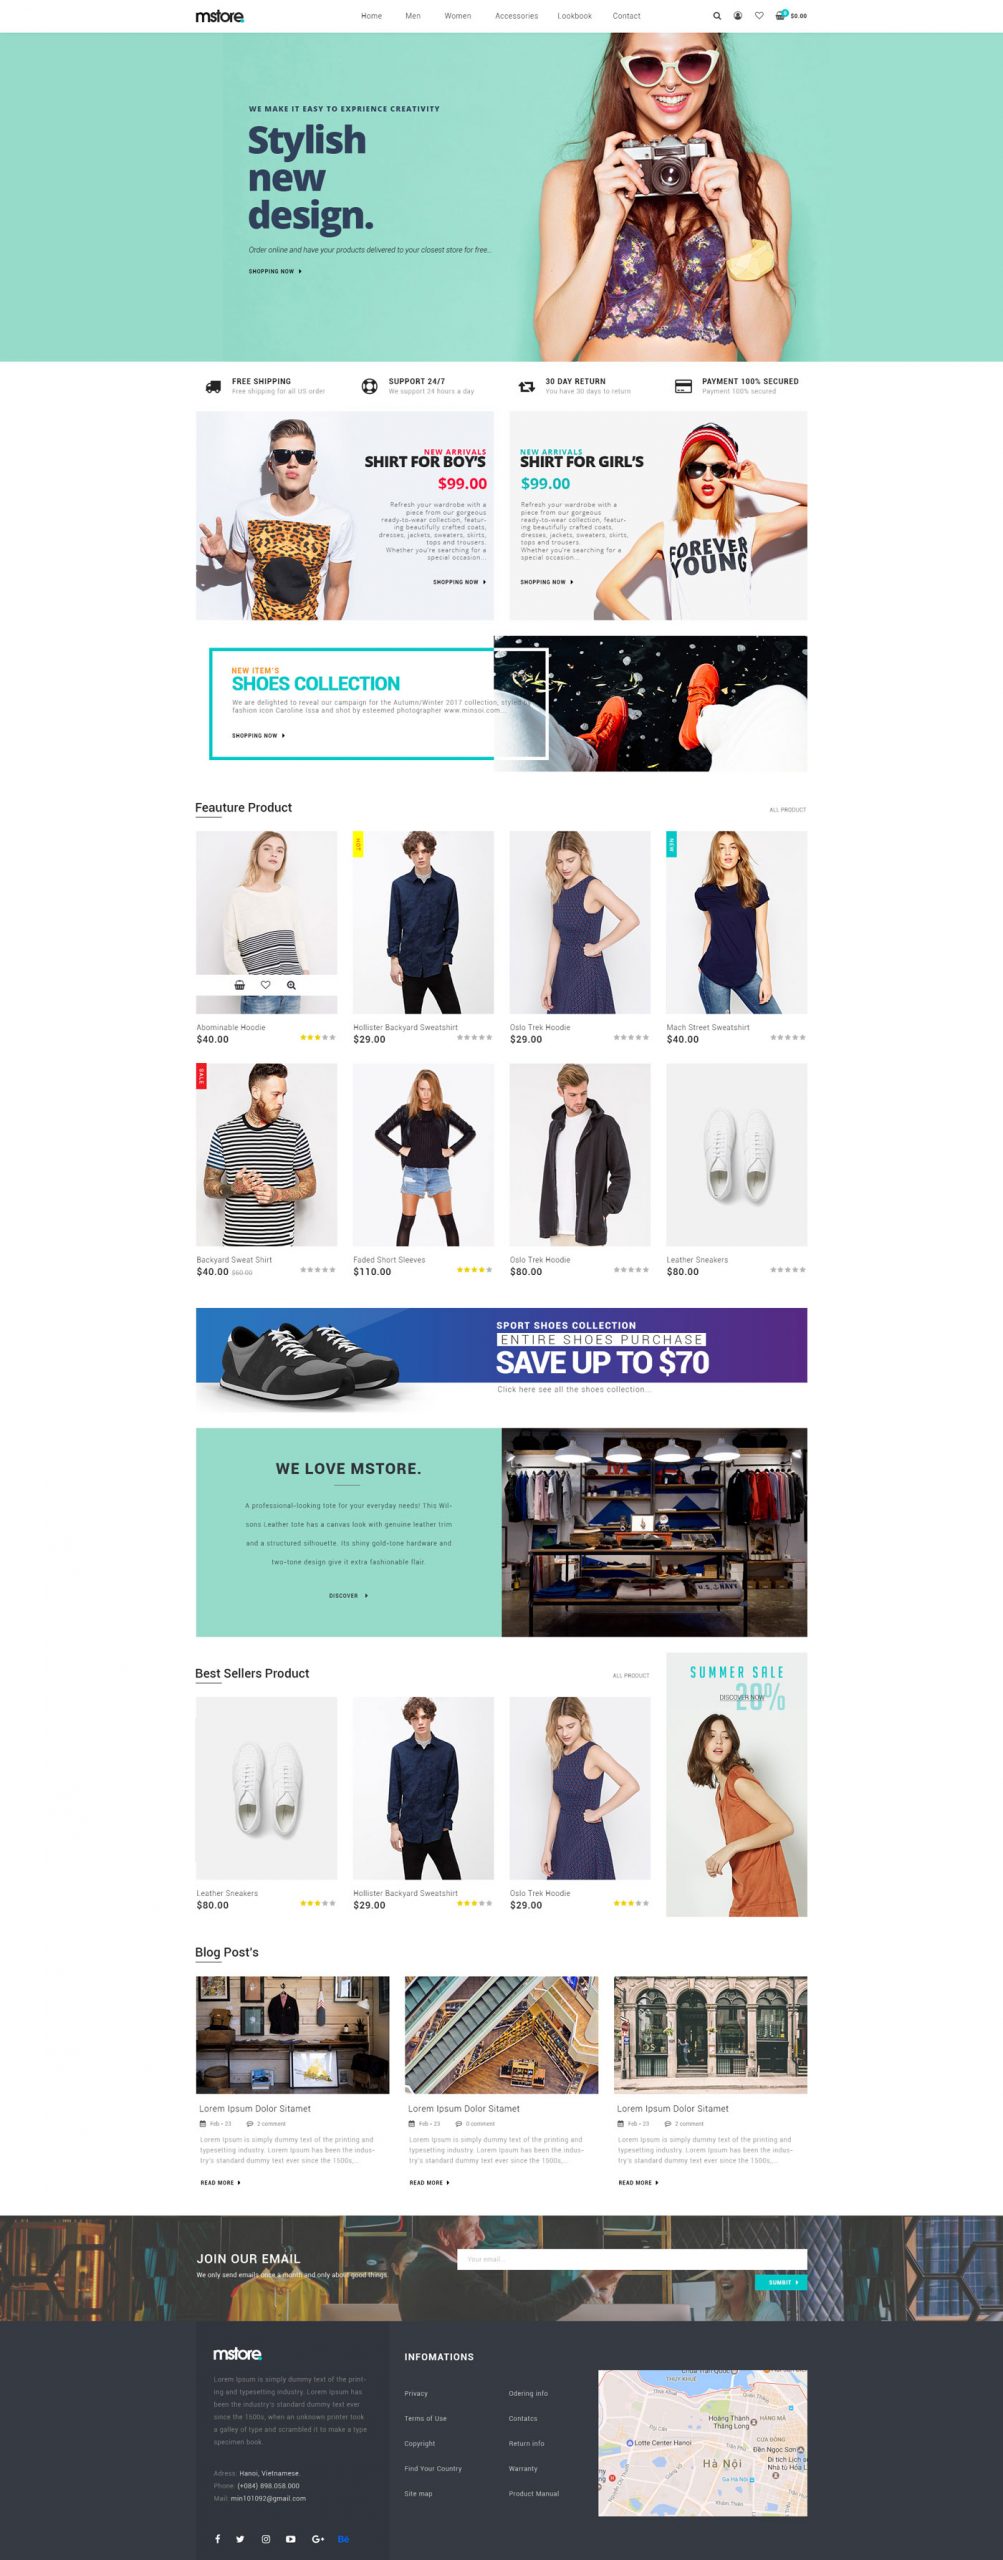 Free MStore Ecommerce Website Homepage PSD Template